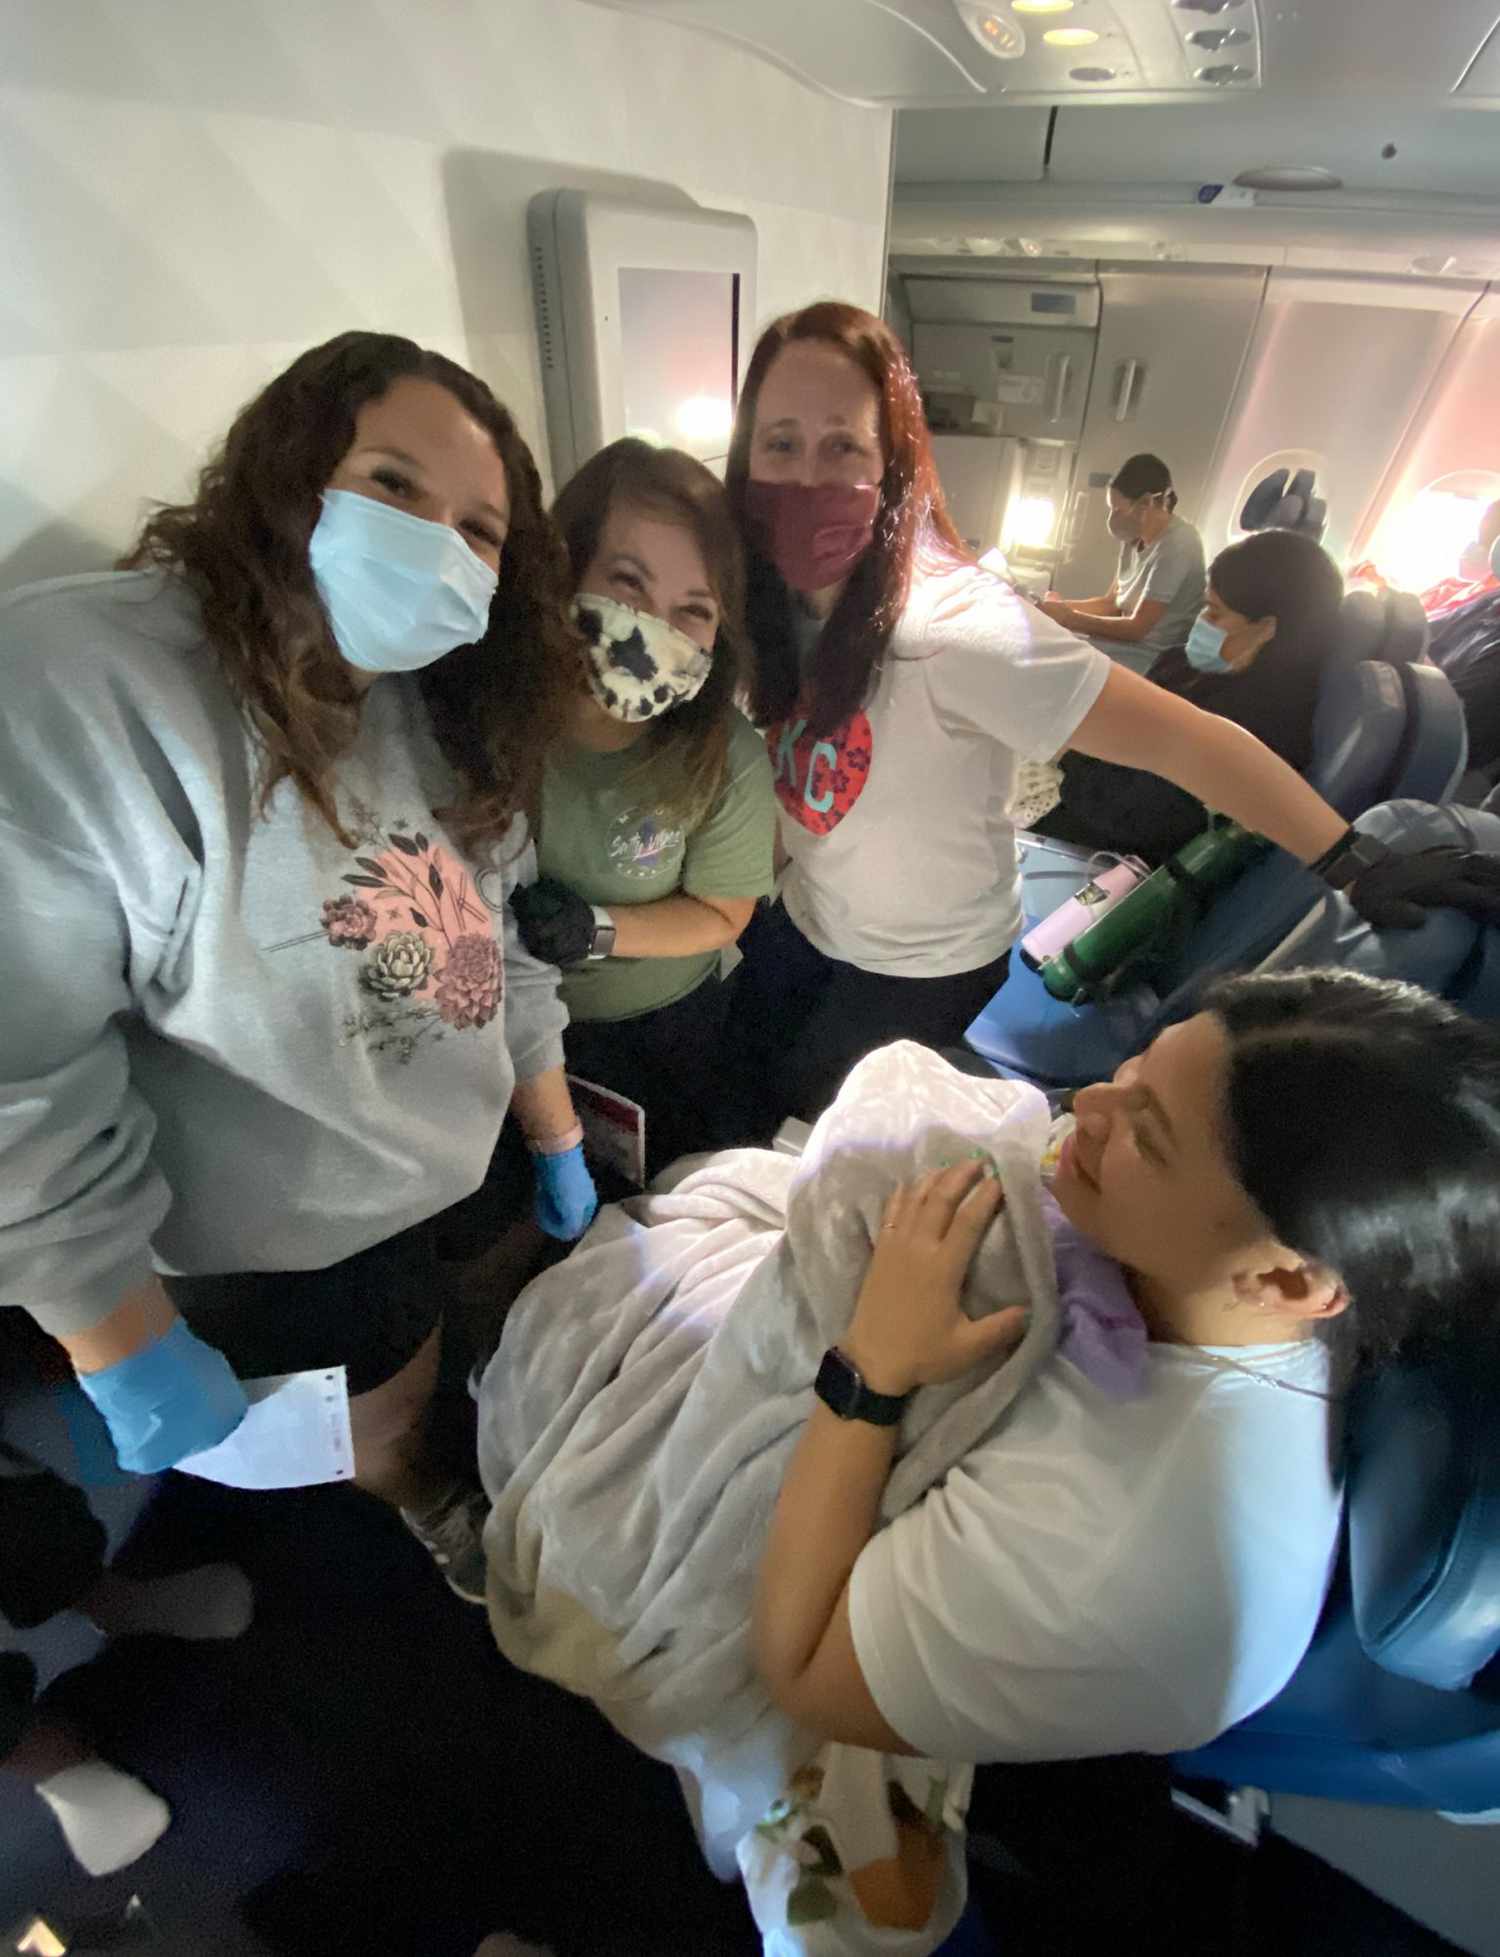 Newborn baby Raymond Mounga has some new aunties and an uncle for life, according to mom Lavinia “Lavi” Mounga, who unexpectedly delivered Raymond on a Delta Airlines flight from Salt Lake City, Utah, to Honolulu on Wednesday, April 28